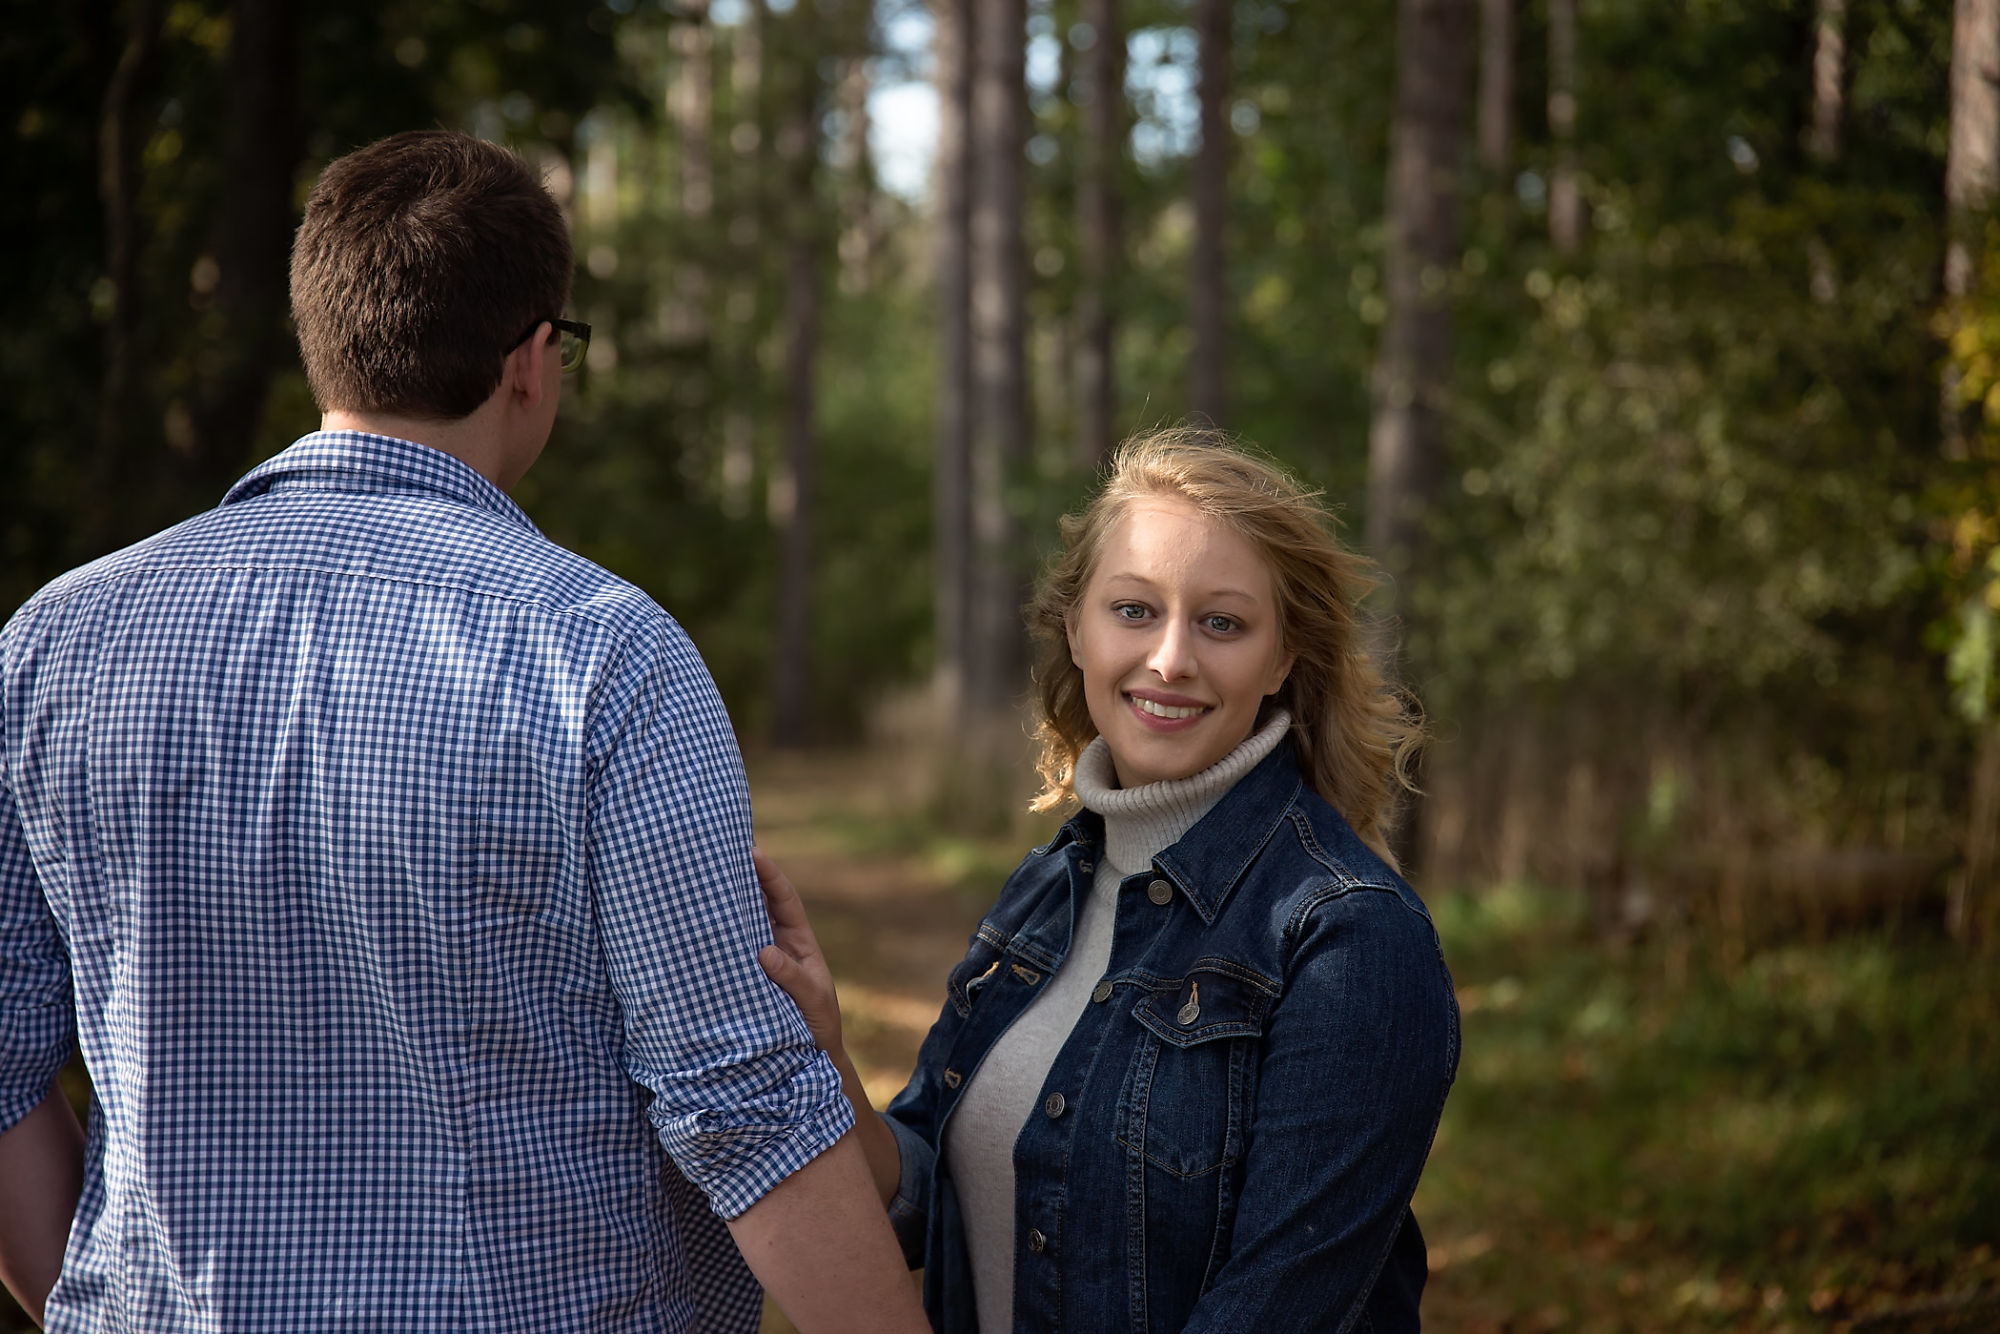 Couple Kaitlyn and Nick in the forest during their engagement shoot with Waterdown Engagement Photographer Jennifer Blaak.